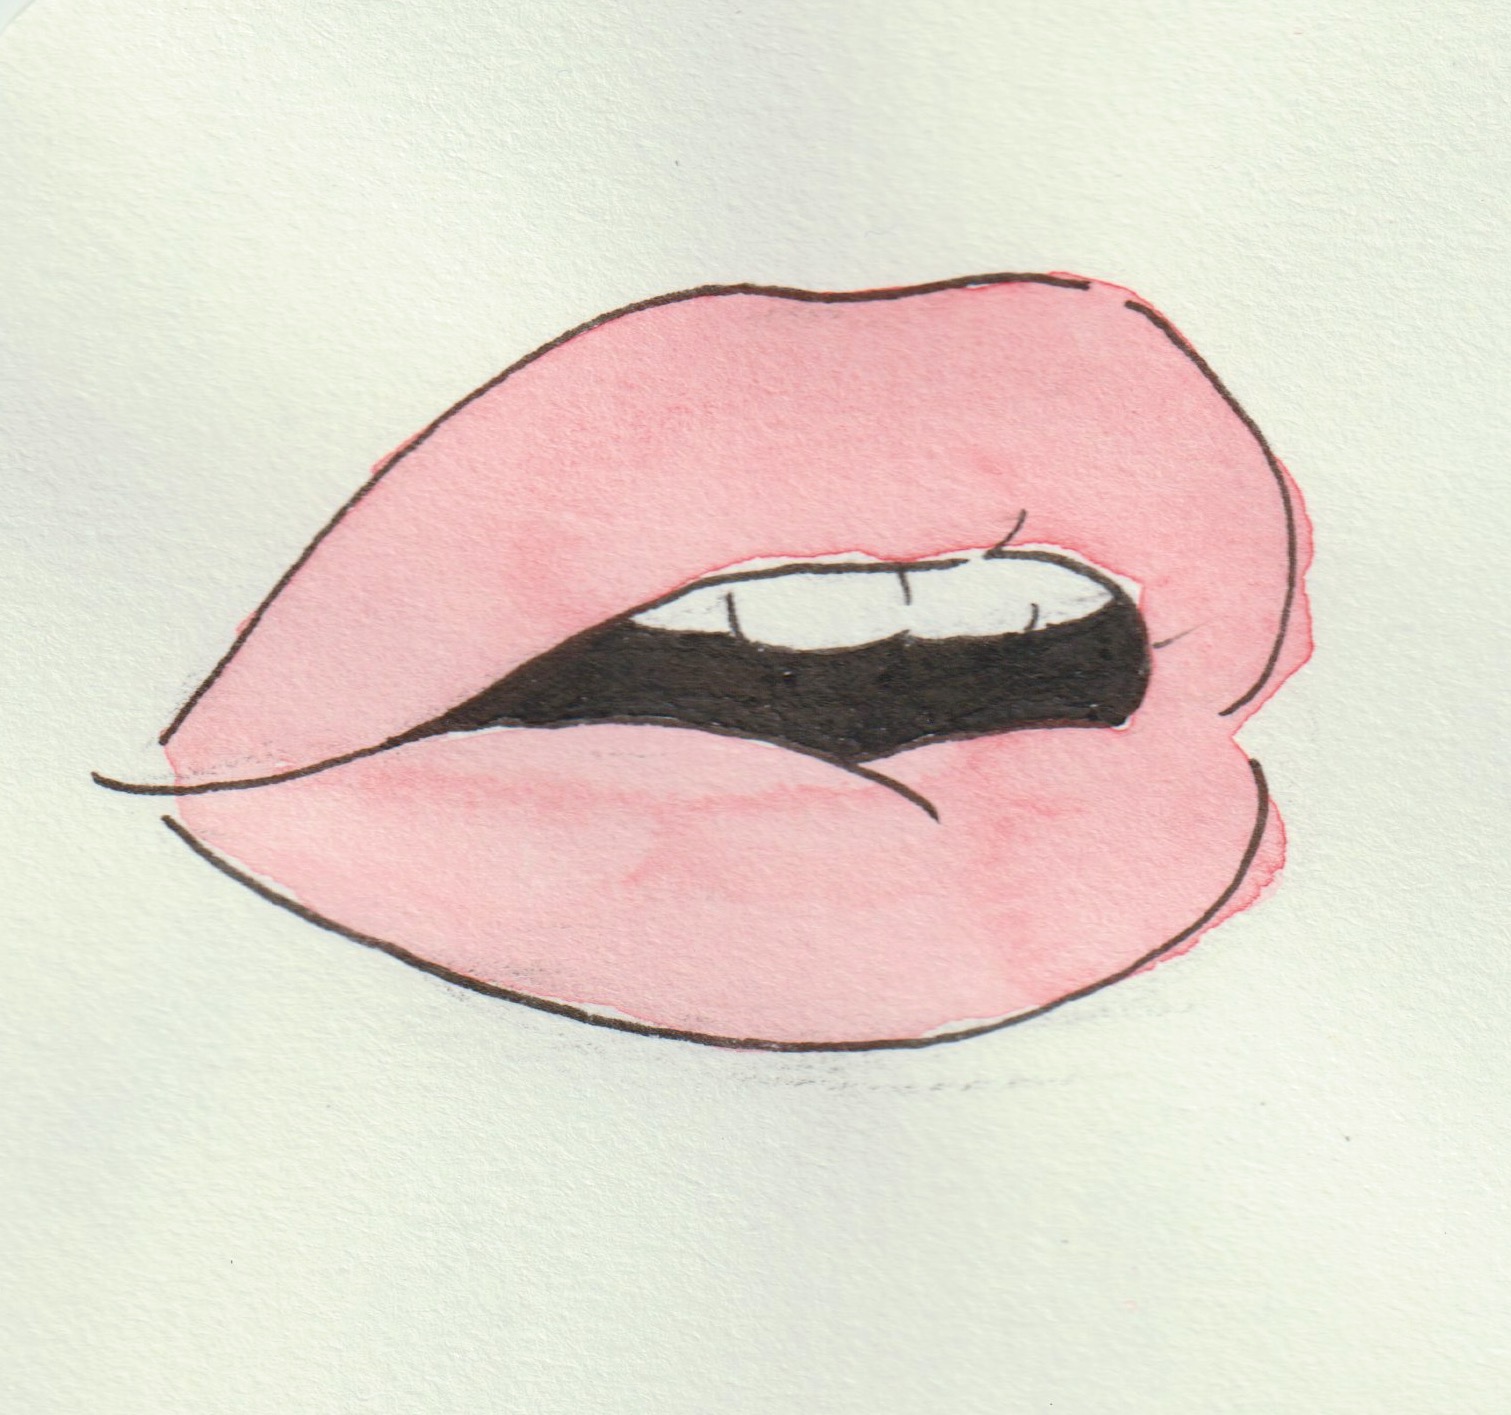 Watercolor illustration of red lips slightly open, showing teeth.